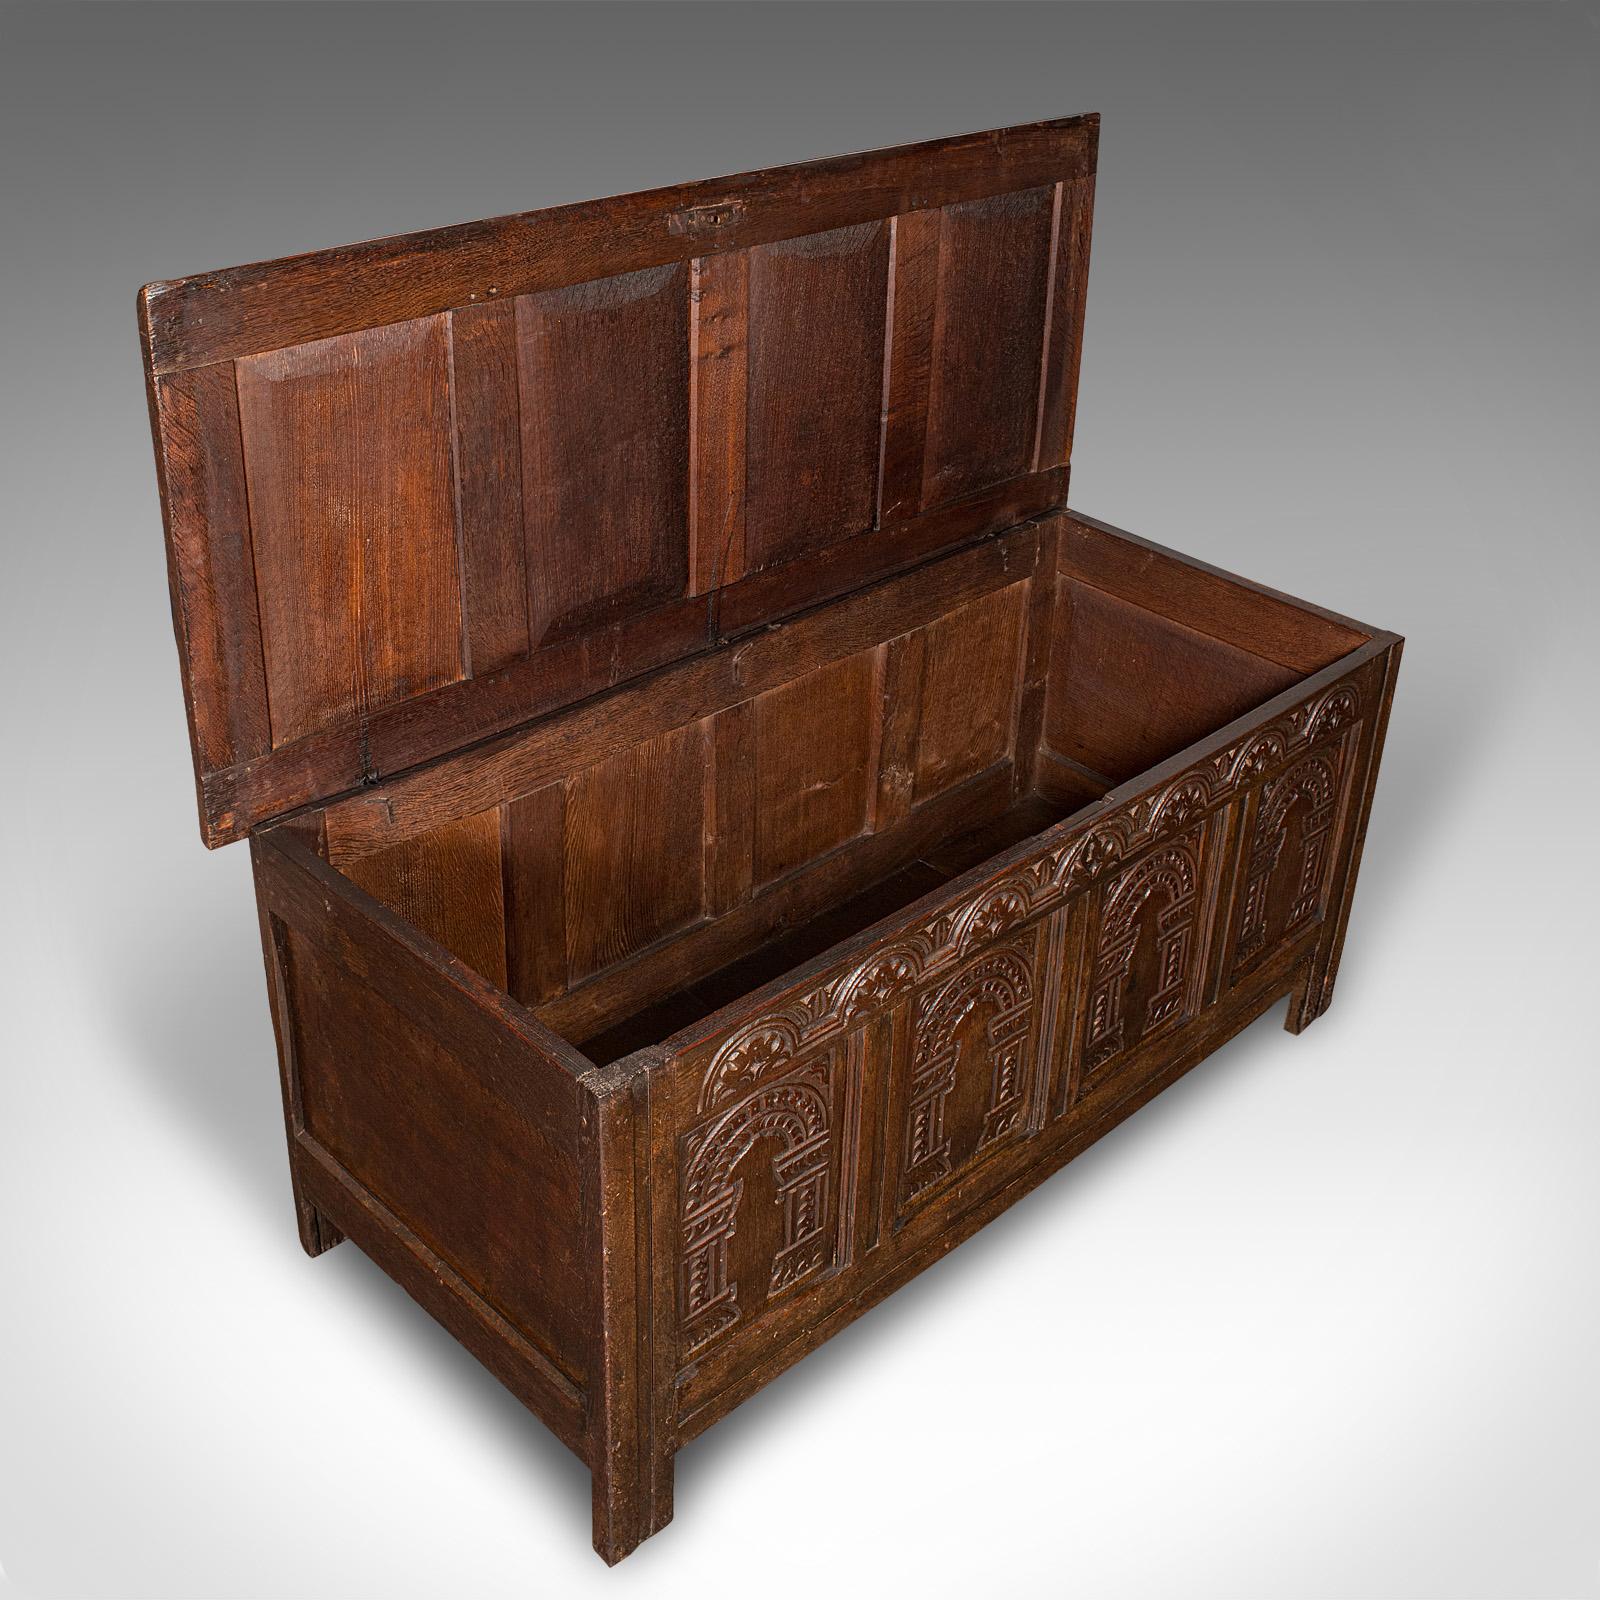 Large Antique Coffer, English, Oak, Carved Trunk, Window Seat, William III, 1700 For Sale 2